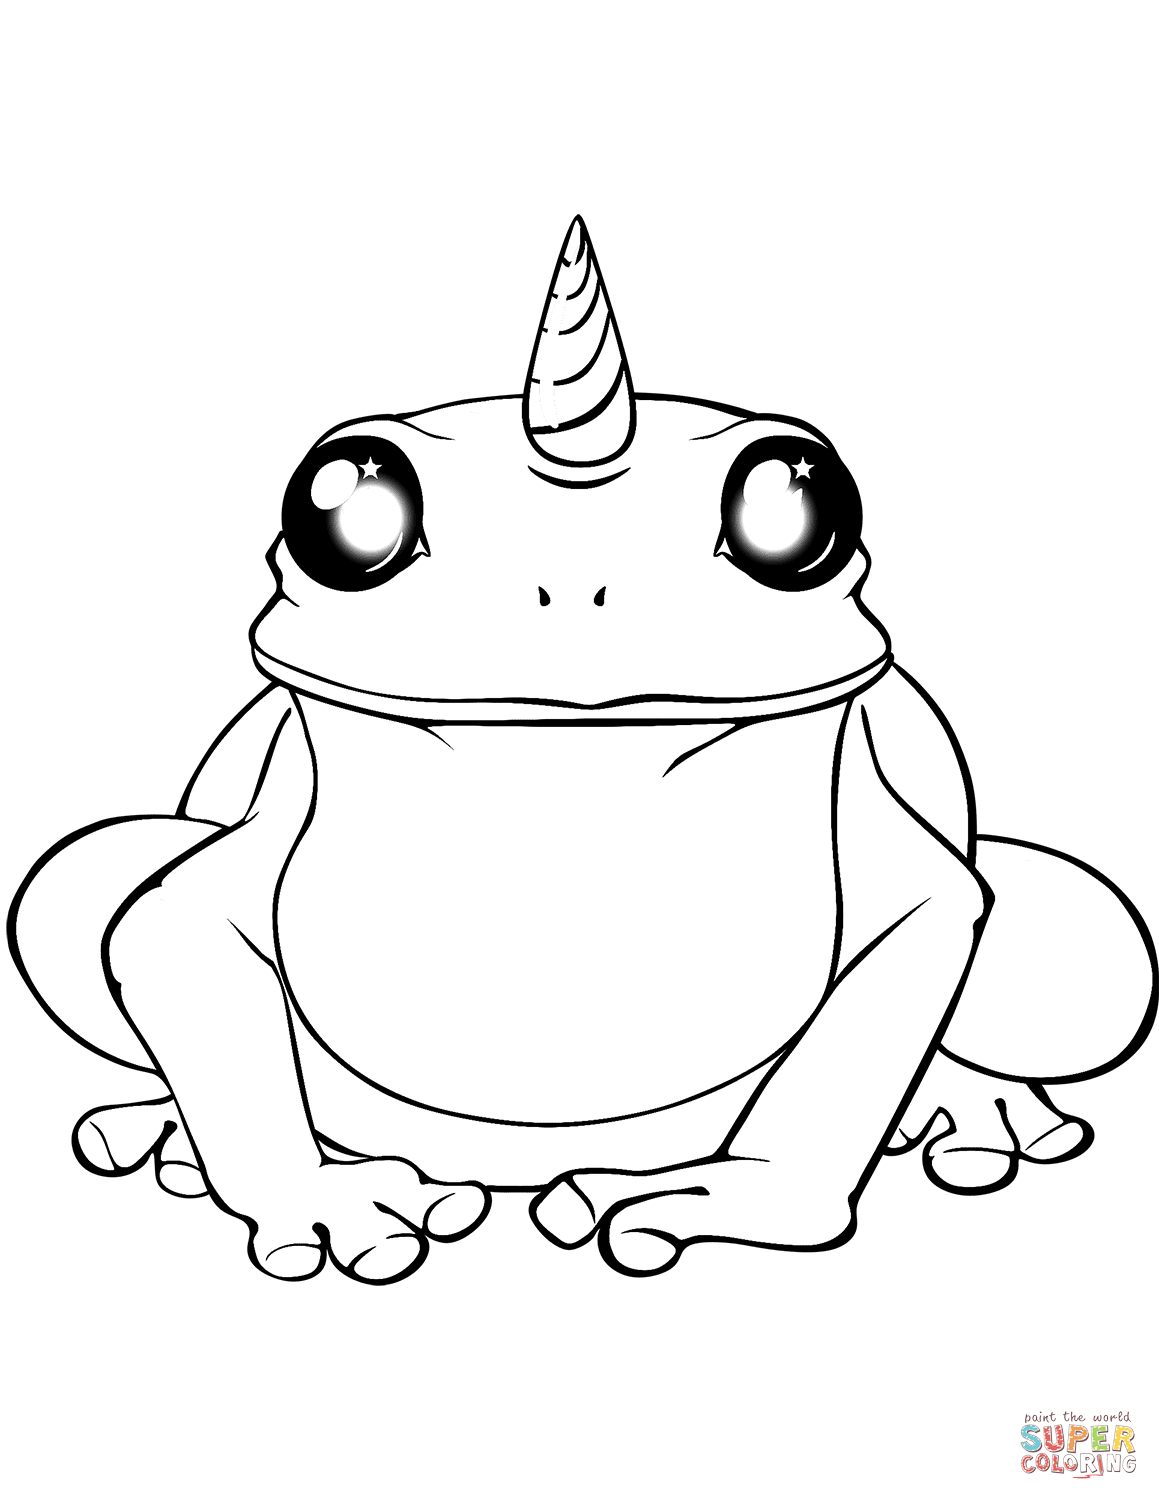 Unicorn Frog coloring page | Free Printable Coloring Pages